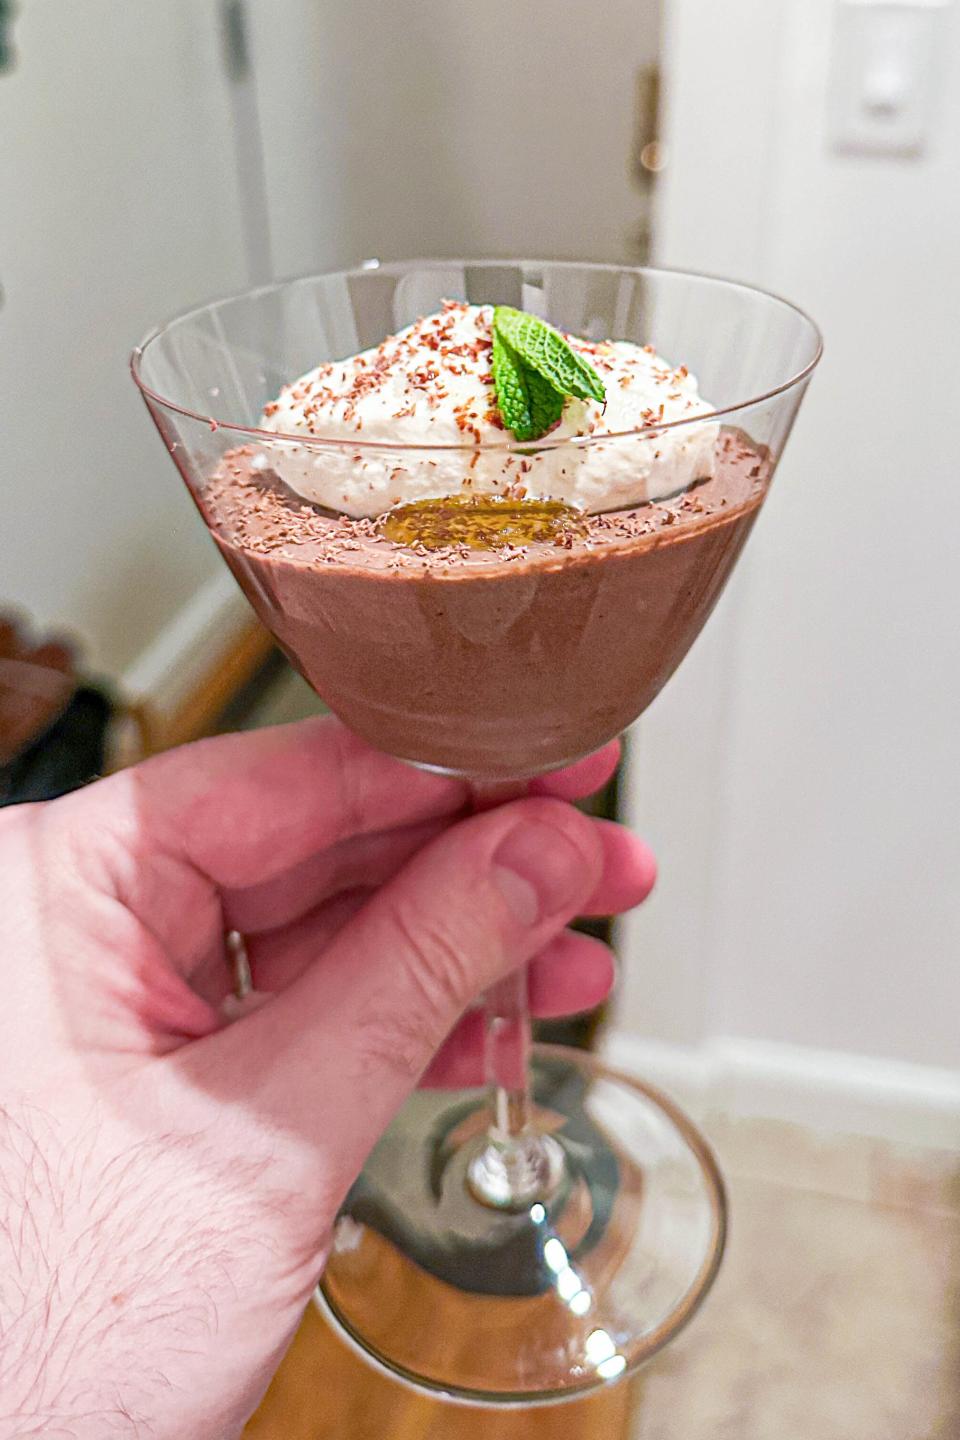 Hand holding a glass with chocolate mousse topped with whipped cream and a mint leaf